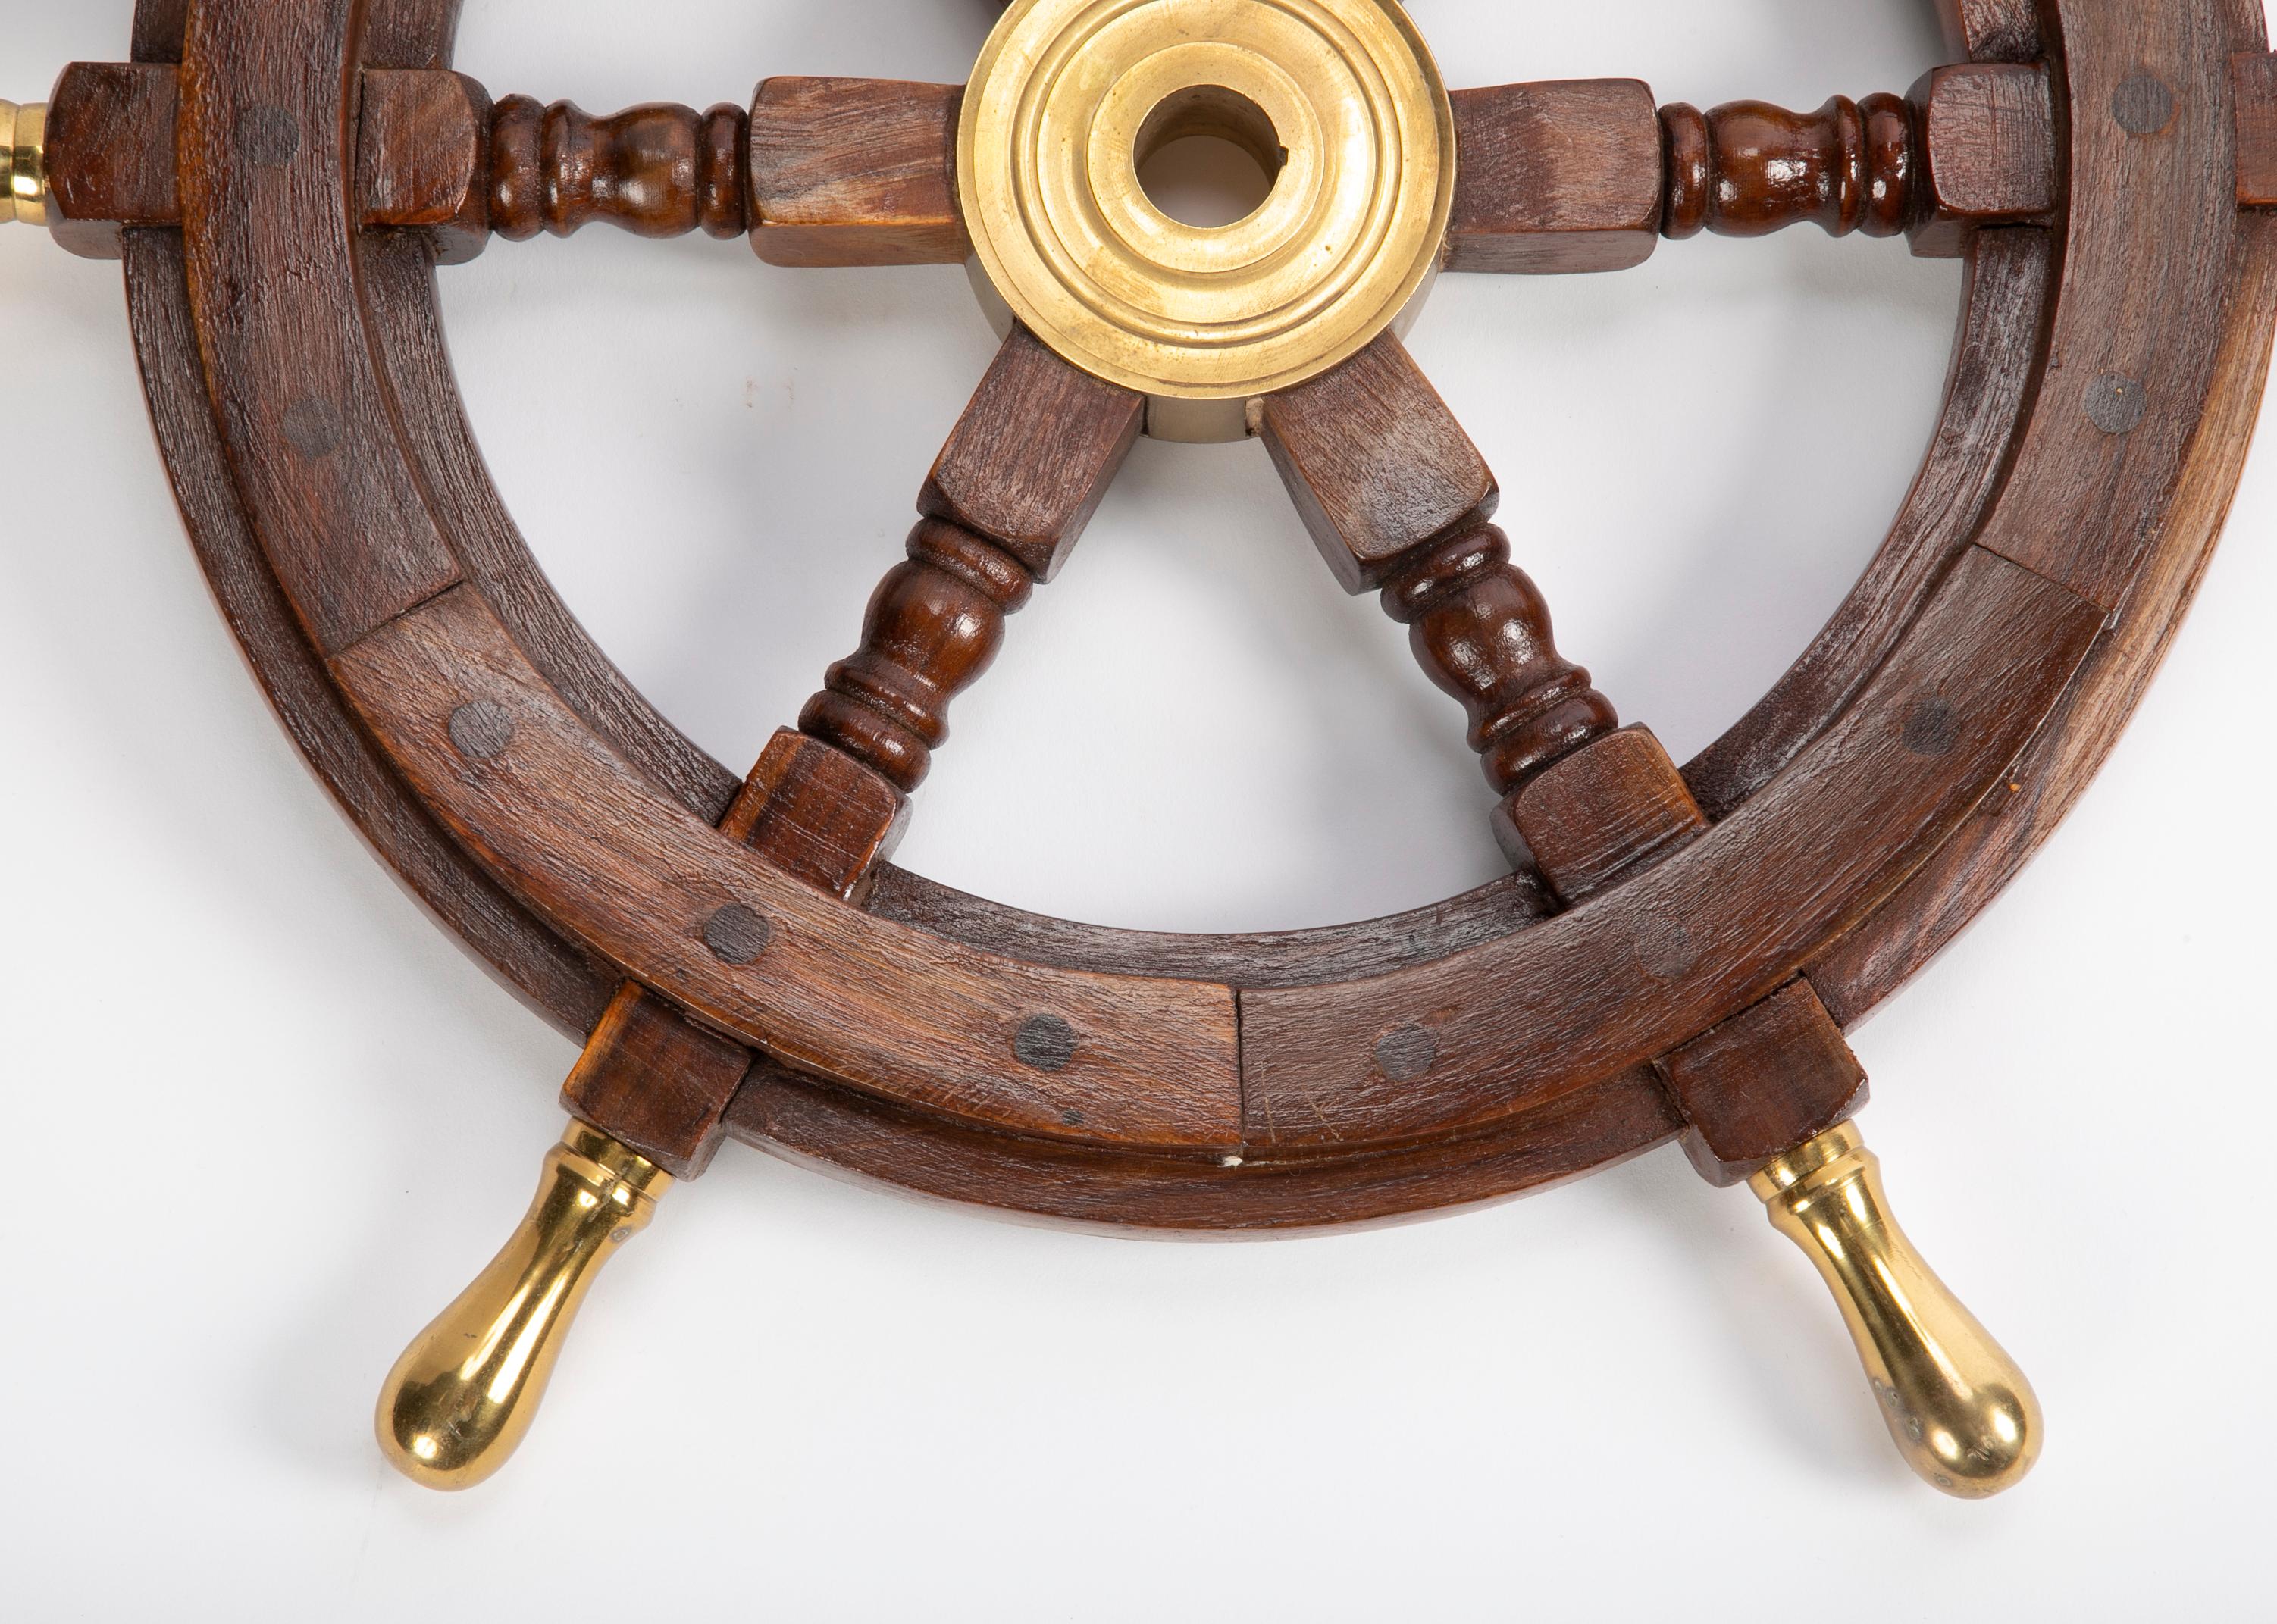 20th Century Large Wooden Ship's Wheel with Brass Accents For Sale